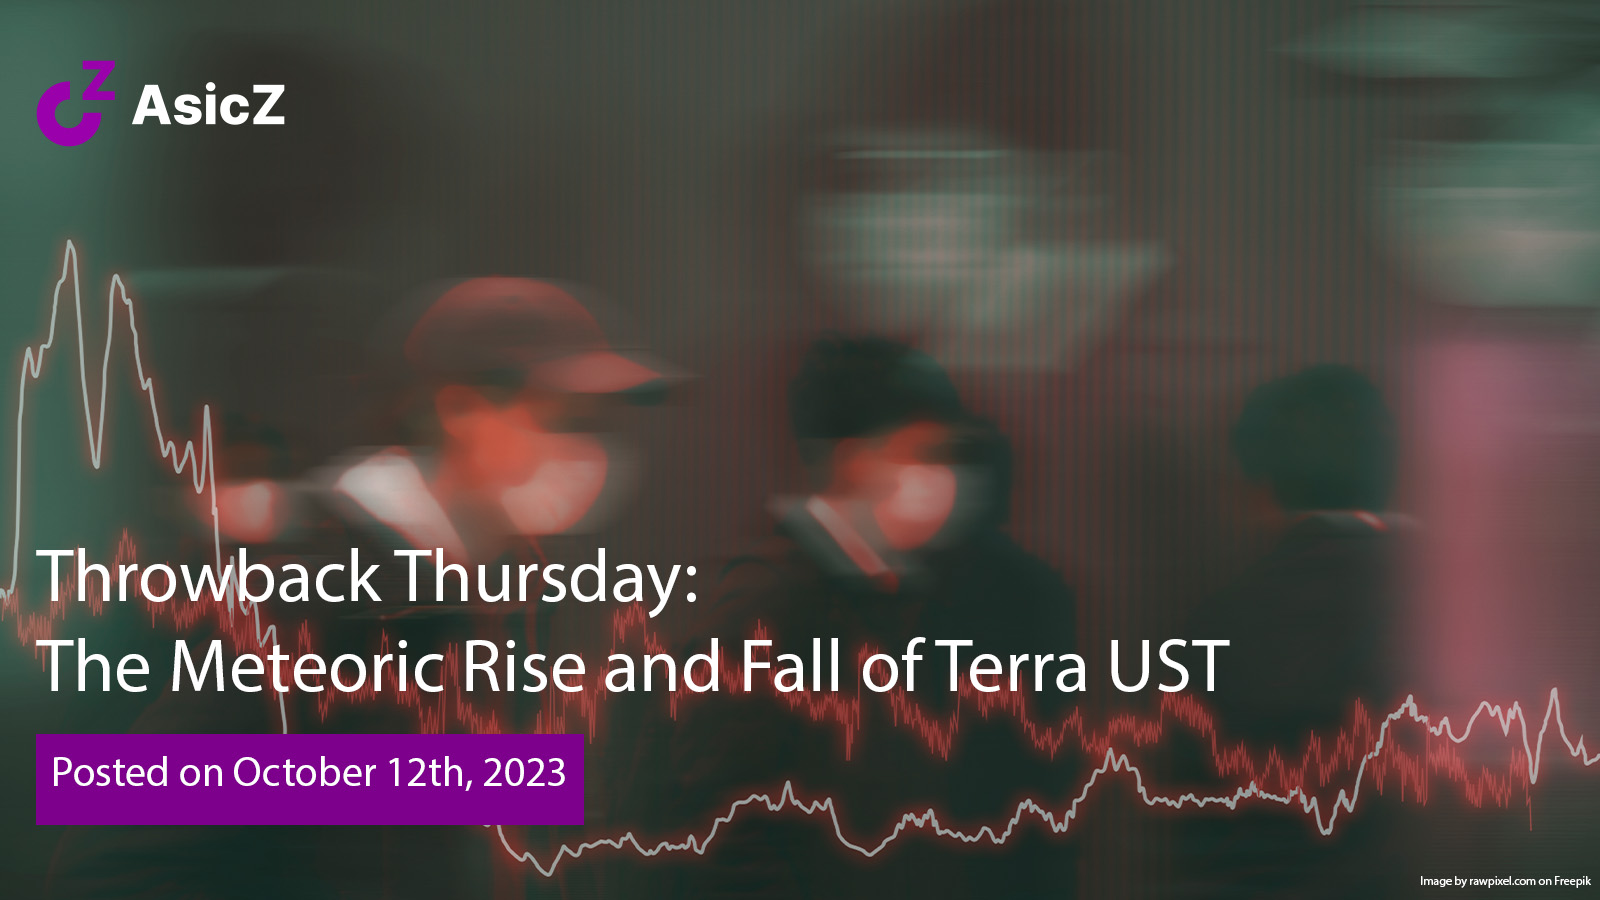 Throwback Thursday: The Meteoric Rise and Fall of Terra UST